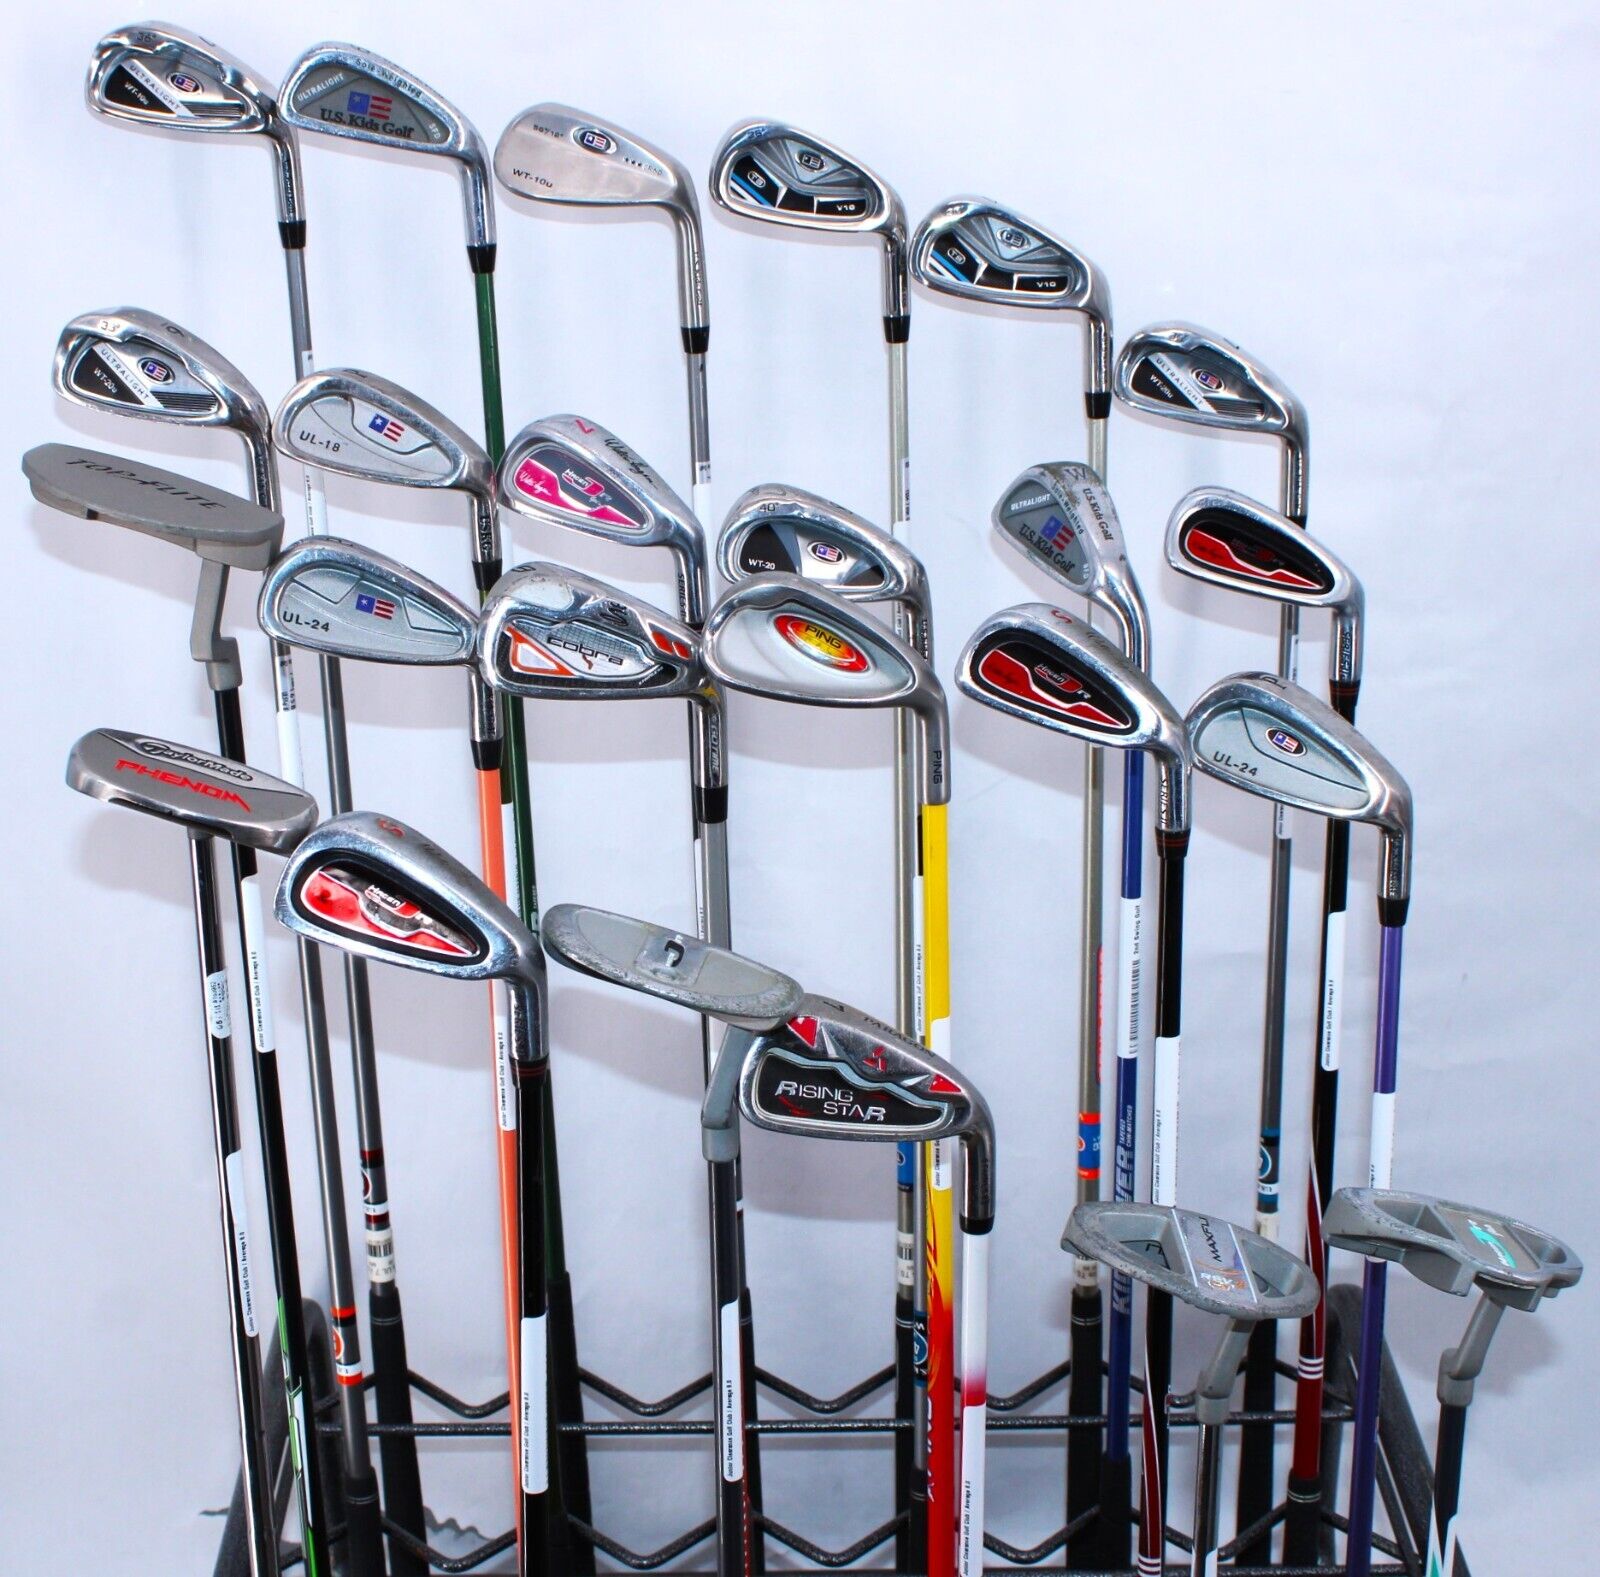 Lot of 48 Junior Golf Clubs — Assorted Brands, Flexes, Left and Right-Handed